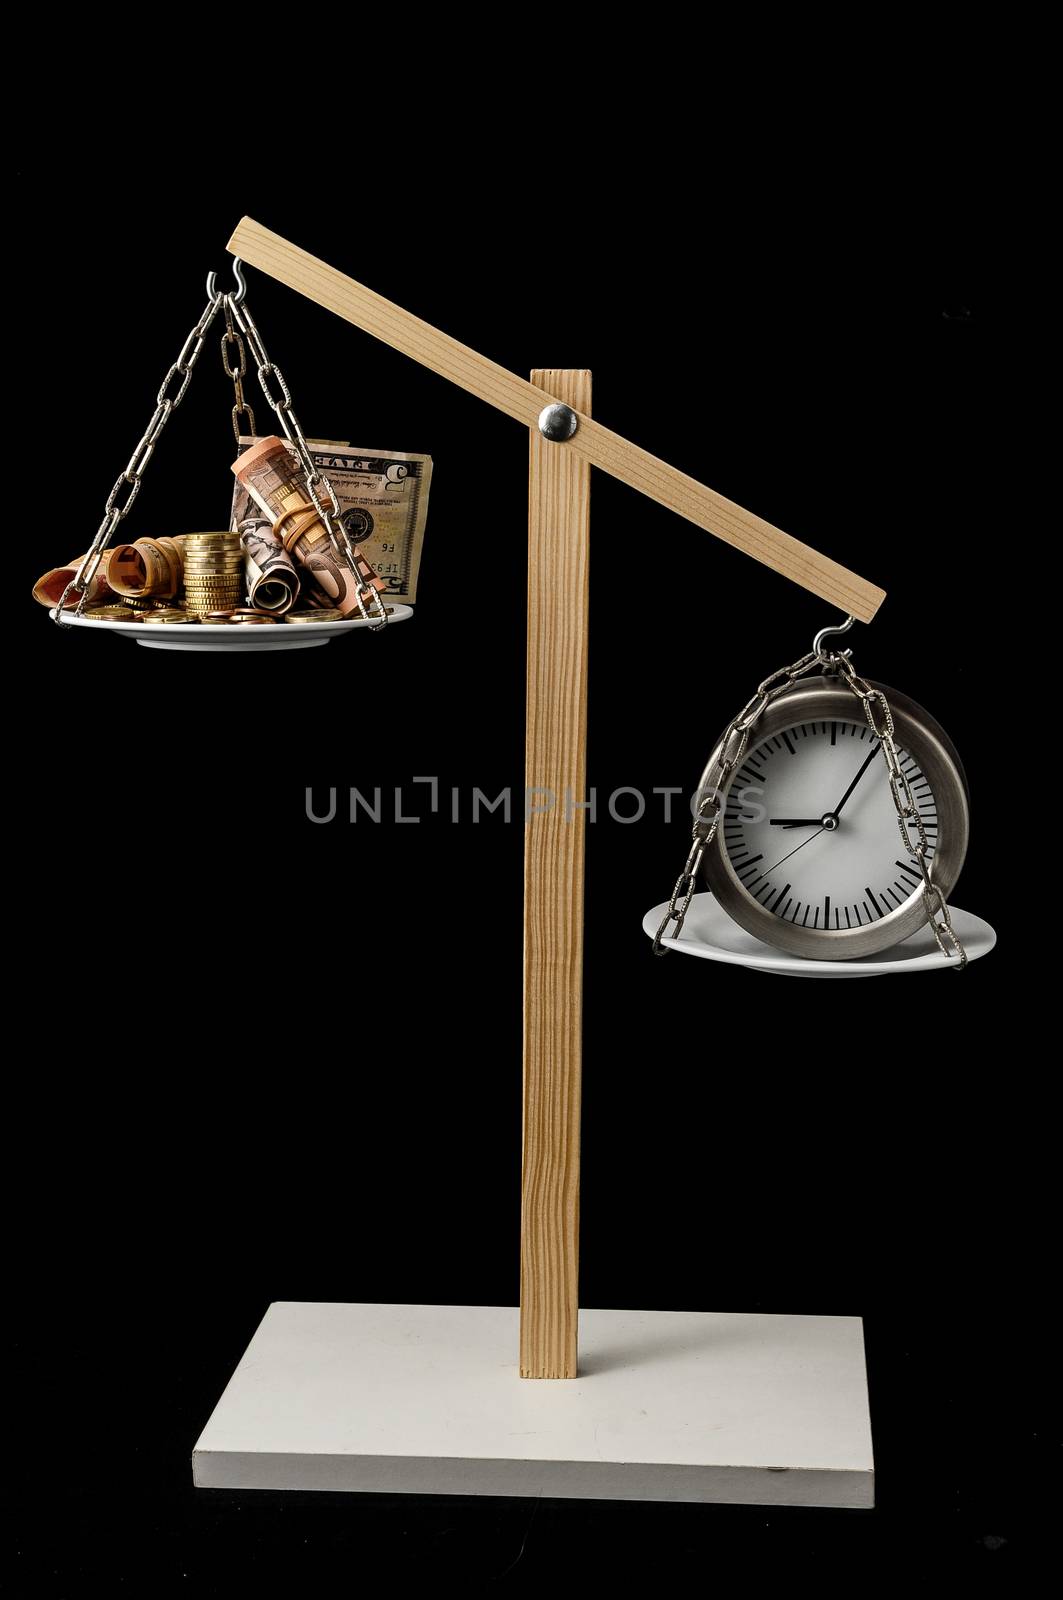 Time is Money Concept Clock and Currency on a Two Pan Balance